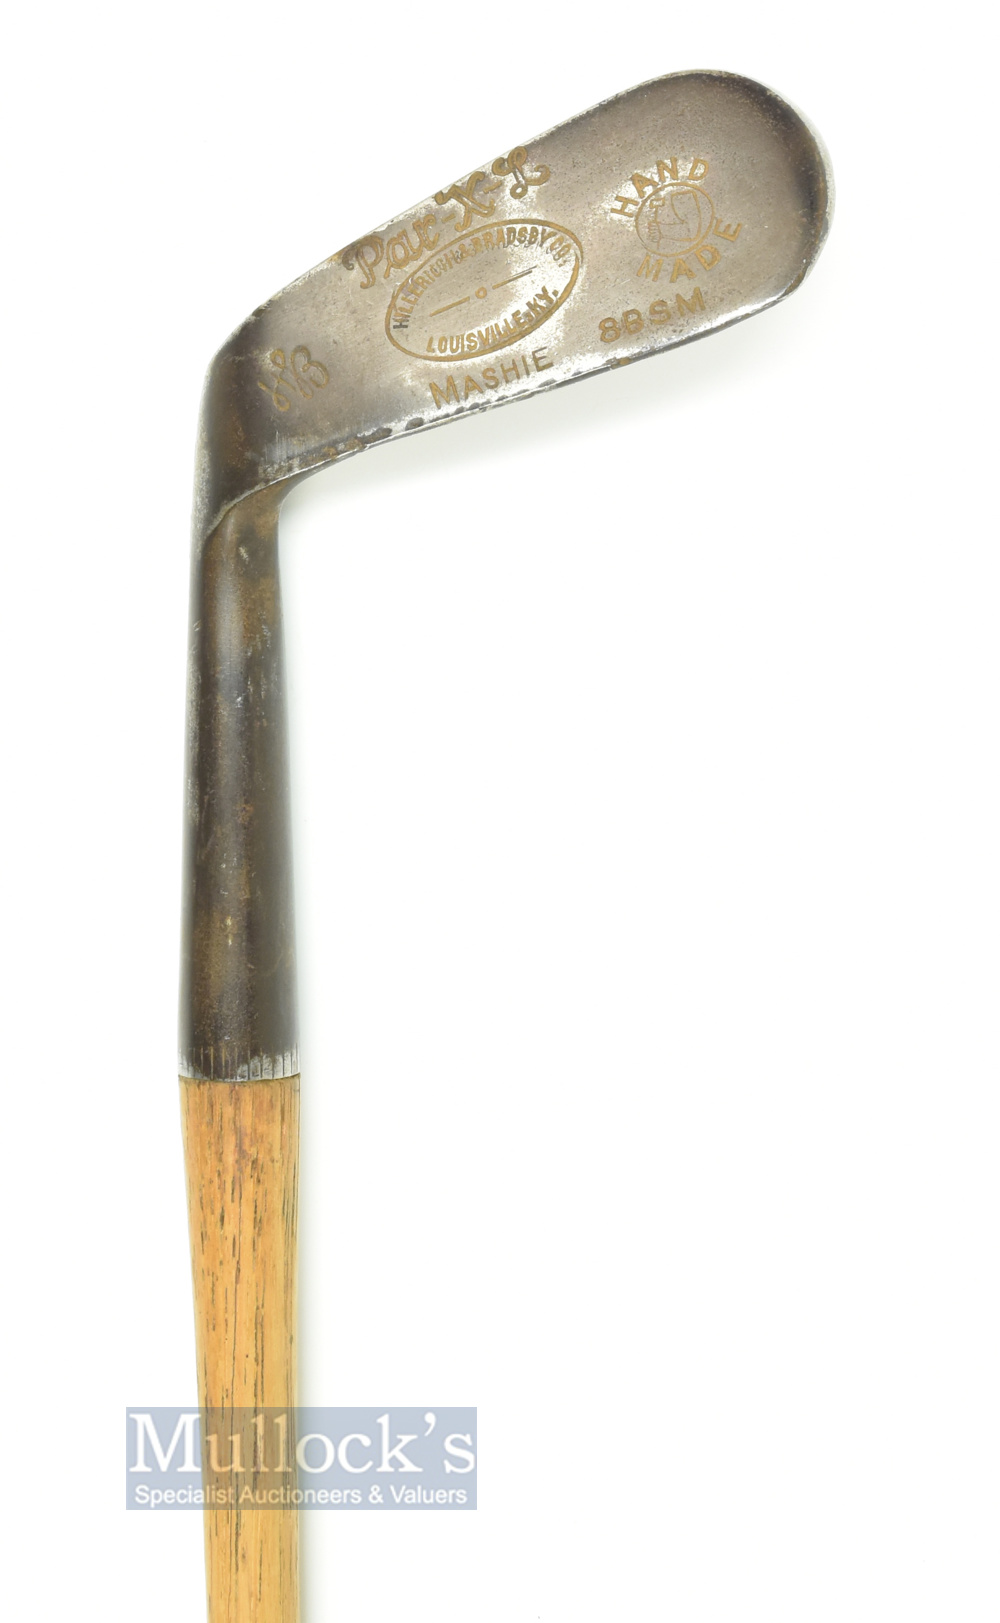 Hillerich & Bradsby Louisville K.Y "The Par-X-L" ribbed face back spin left hand mashie - stamped